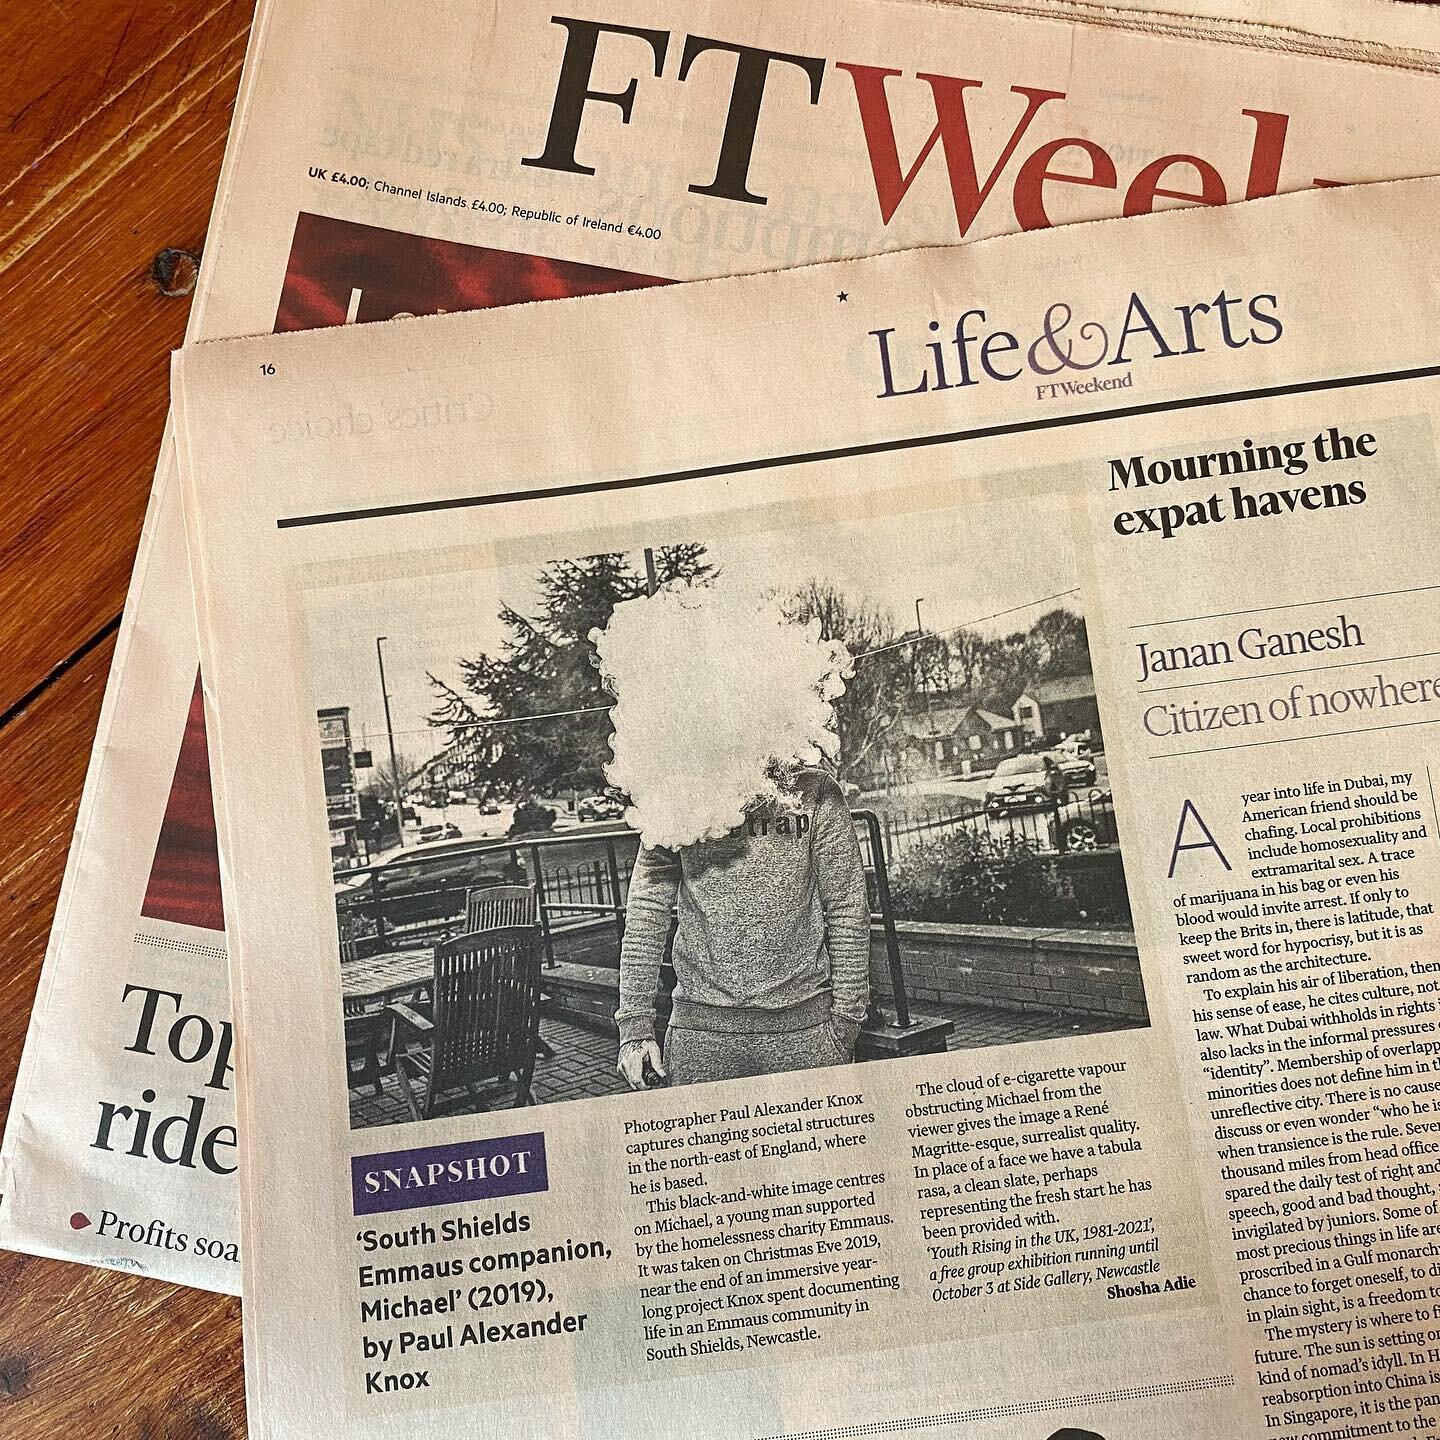 Very pleased to have my image of Michael featured in todays FT Weekend Life &amp; Arts section. 
Thanks to Shosha Adie for the wonderful words, and @lizhingley1 for curating a fantastic exhibition. 

SNAPSHOT
'South Shields Emmaus Companion, Michael&